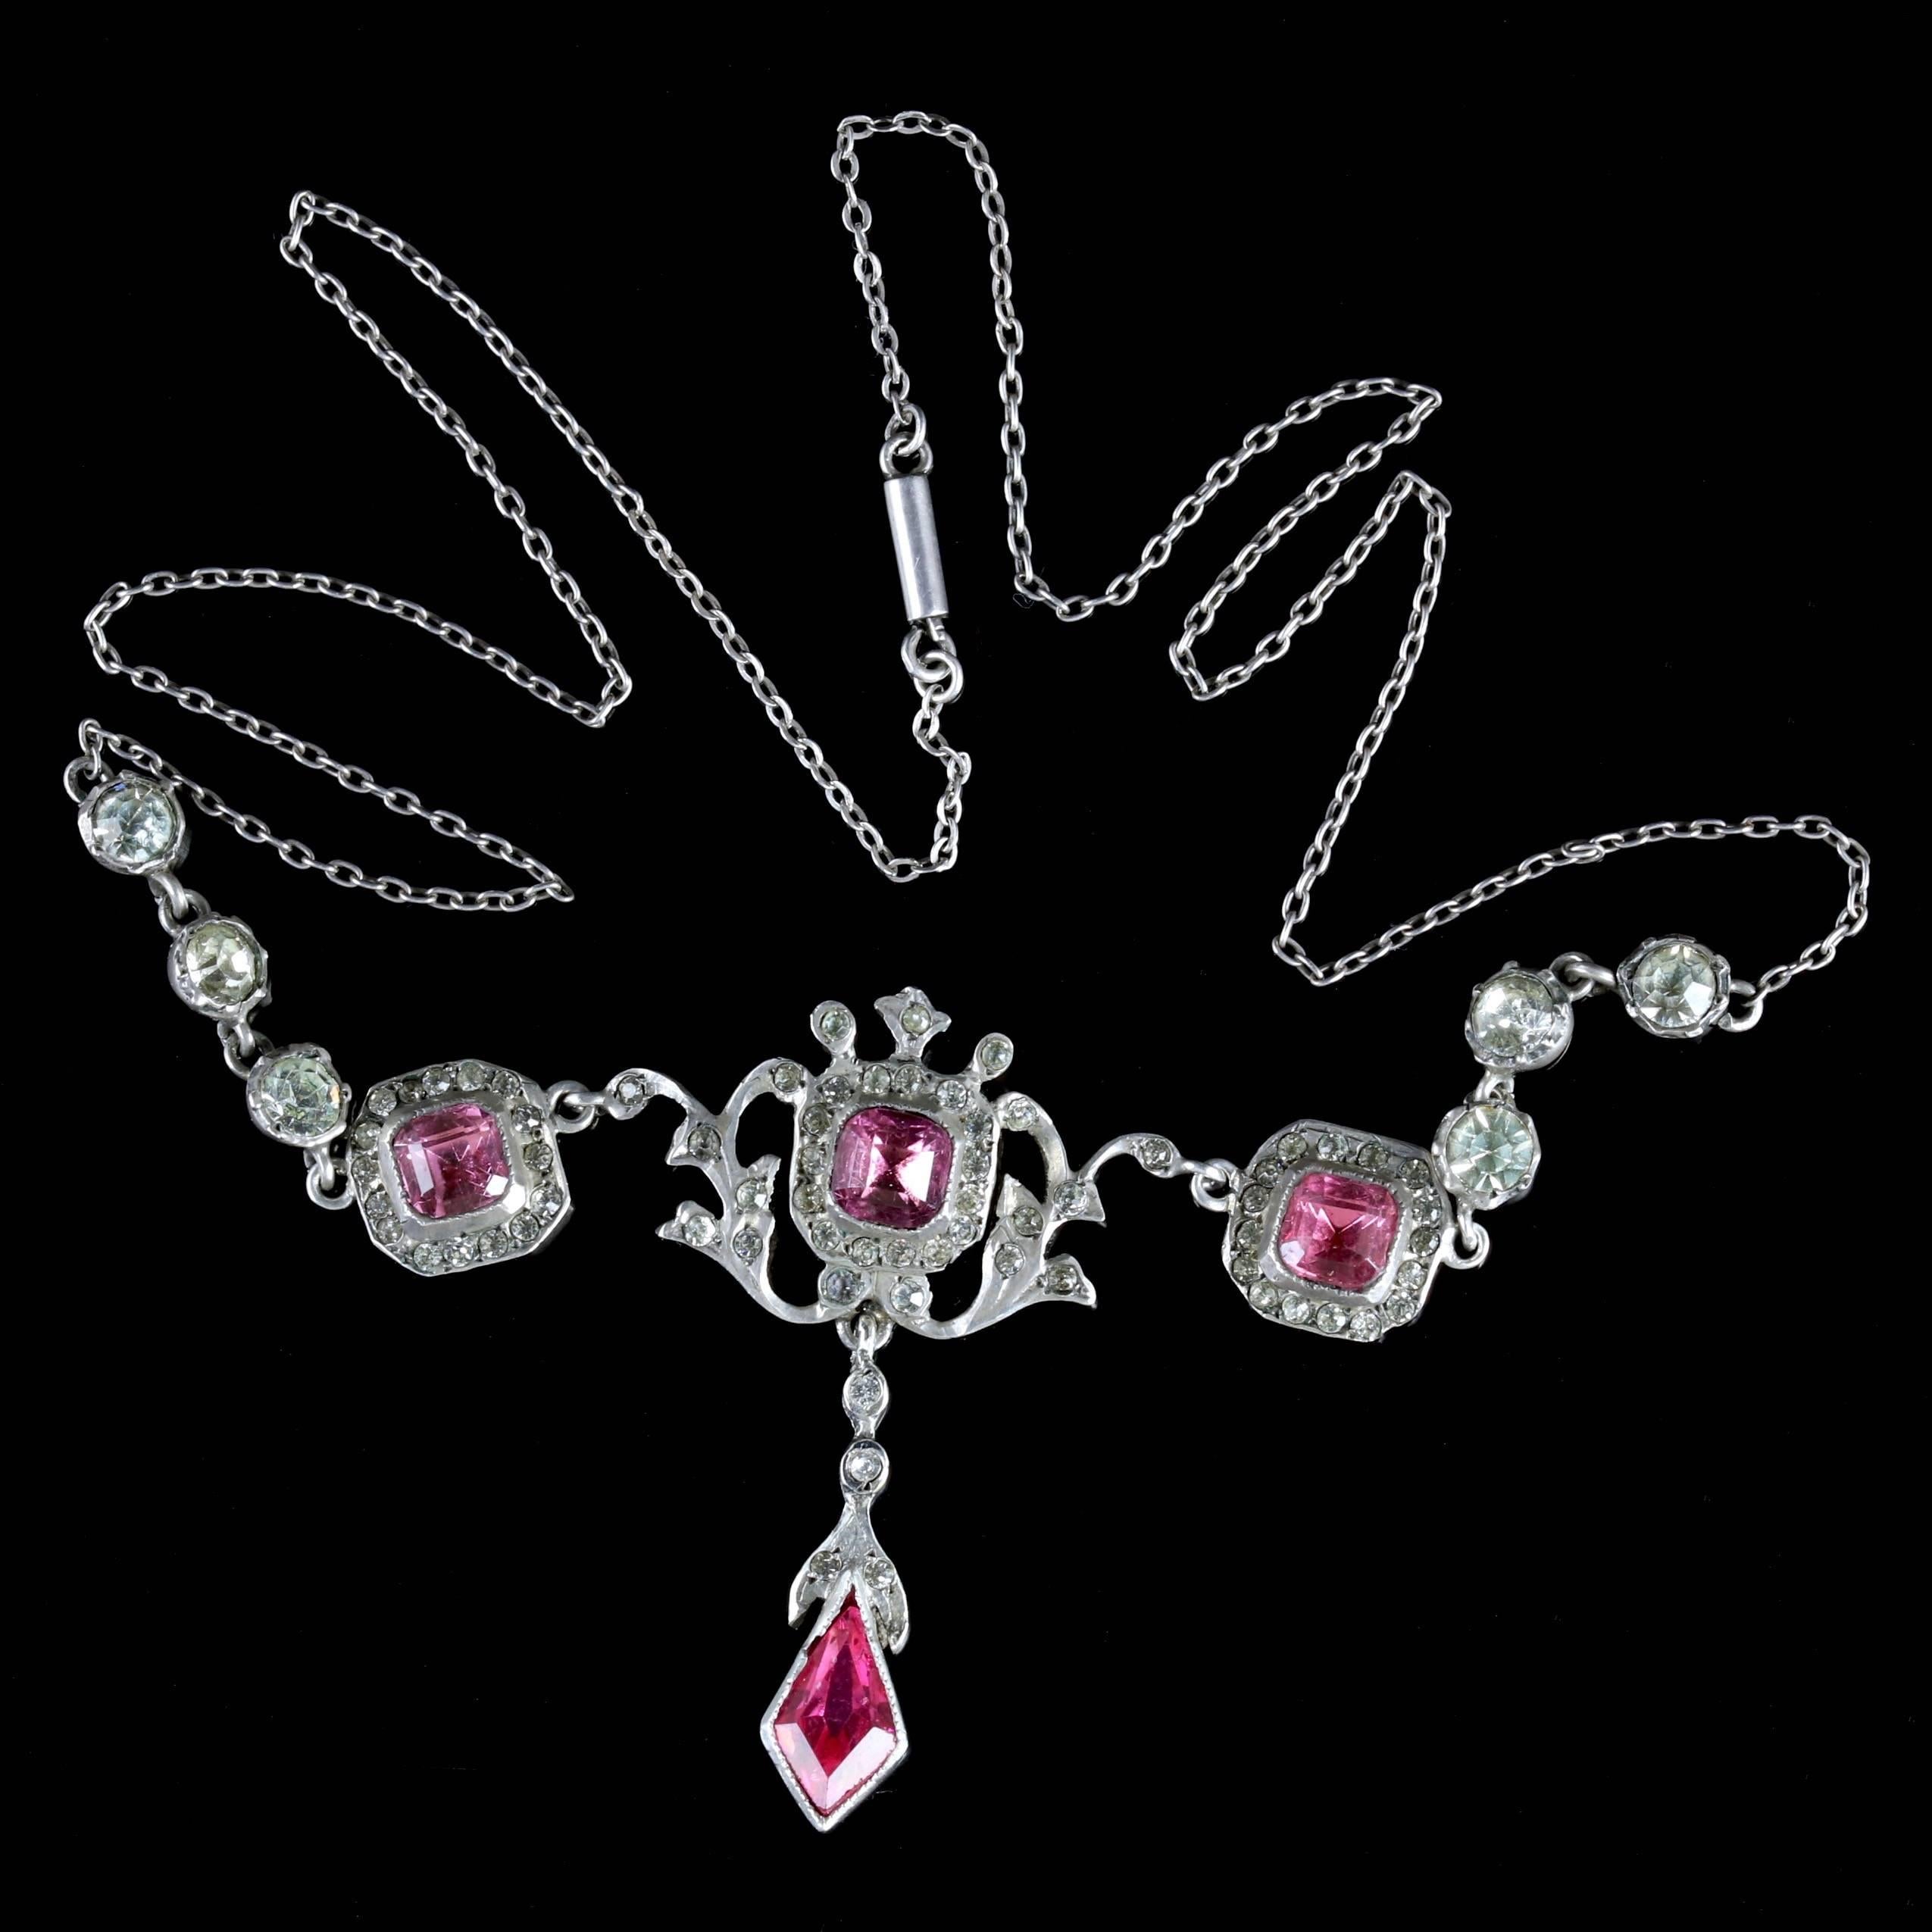 Antique Edwardian Pink White Paste Necklace Silver, circa 1905 In Excellent Condition For Sale In Lancaster, Lancashire